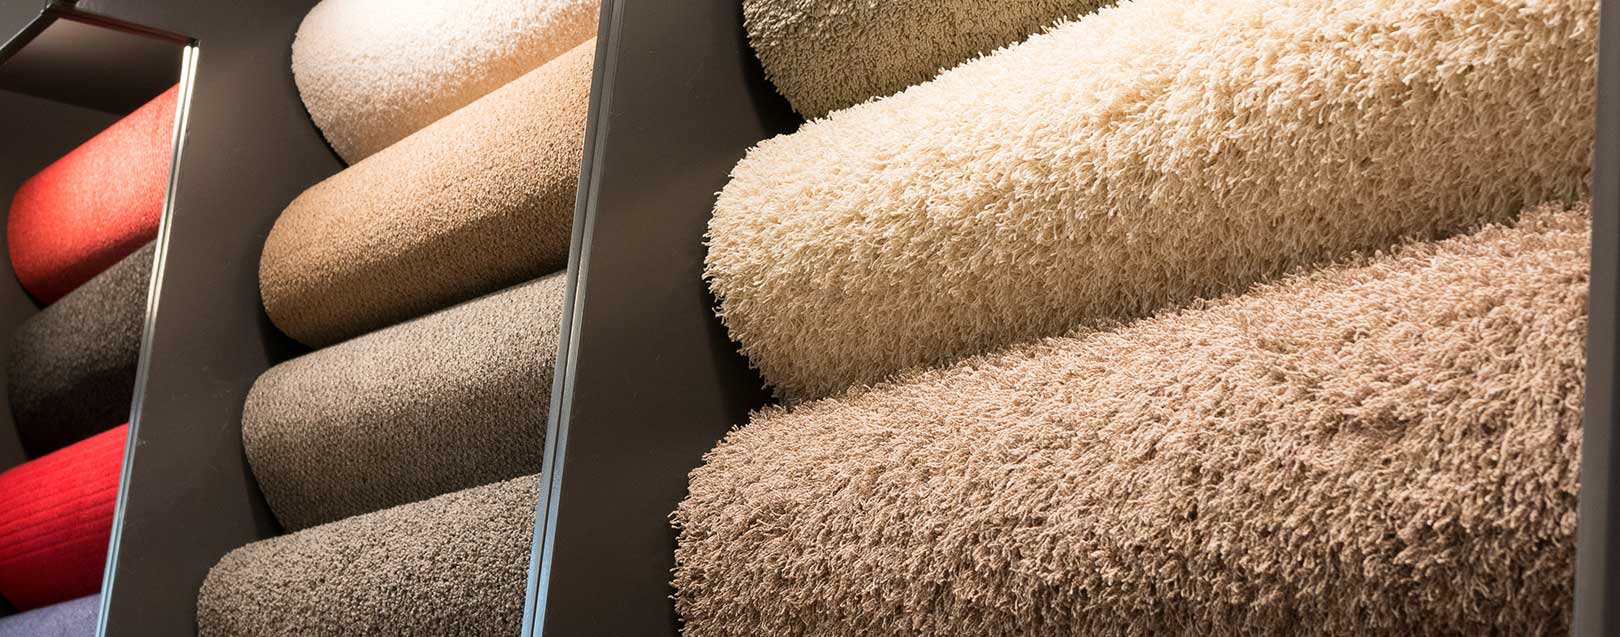 Govt to set up expert panel to better facilitate carpet exports